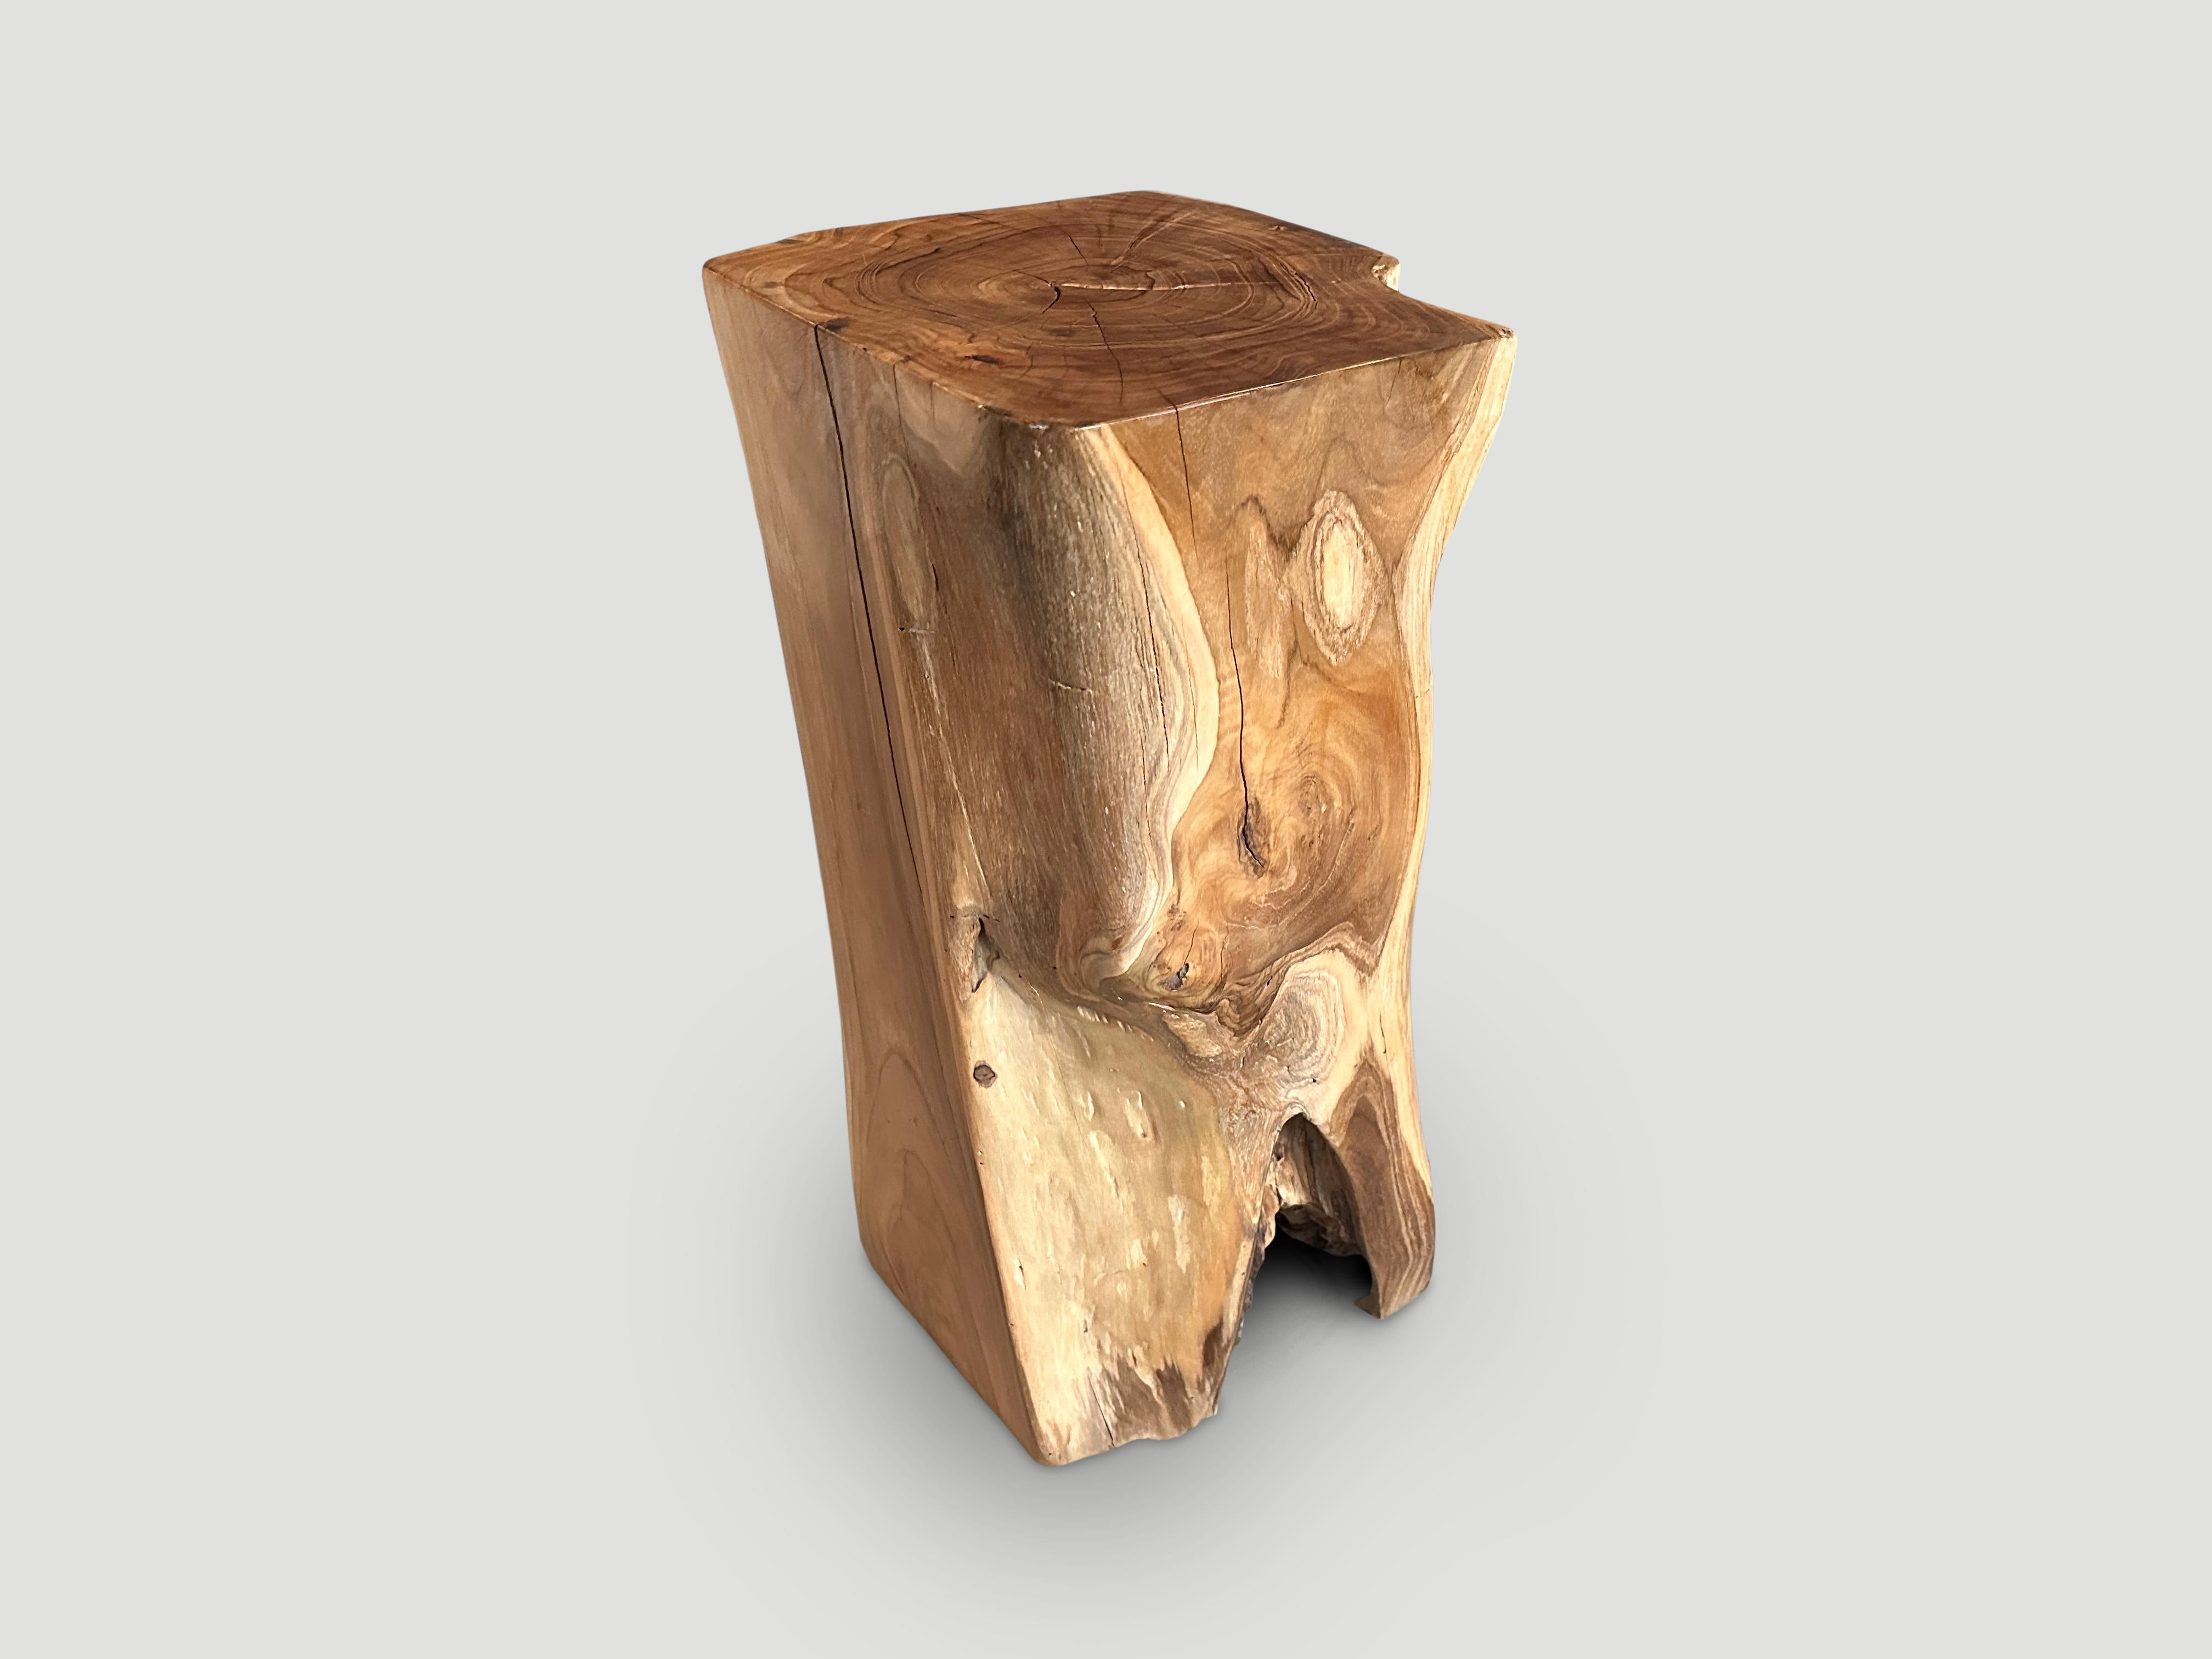 Contemporary Andrianna Shamaris Organic Teak Wood Pedestal or Side Table For Sale